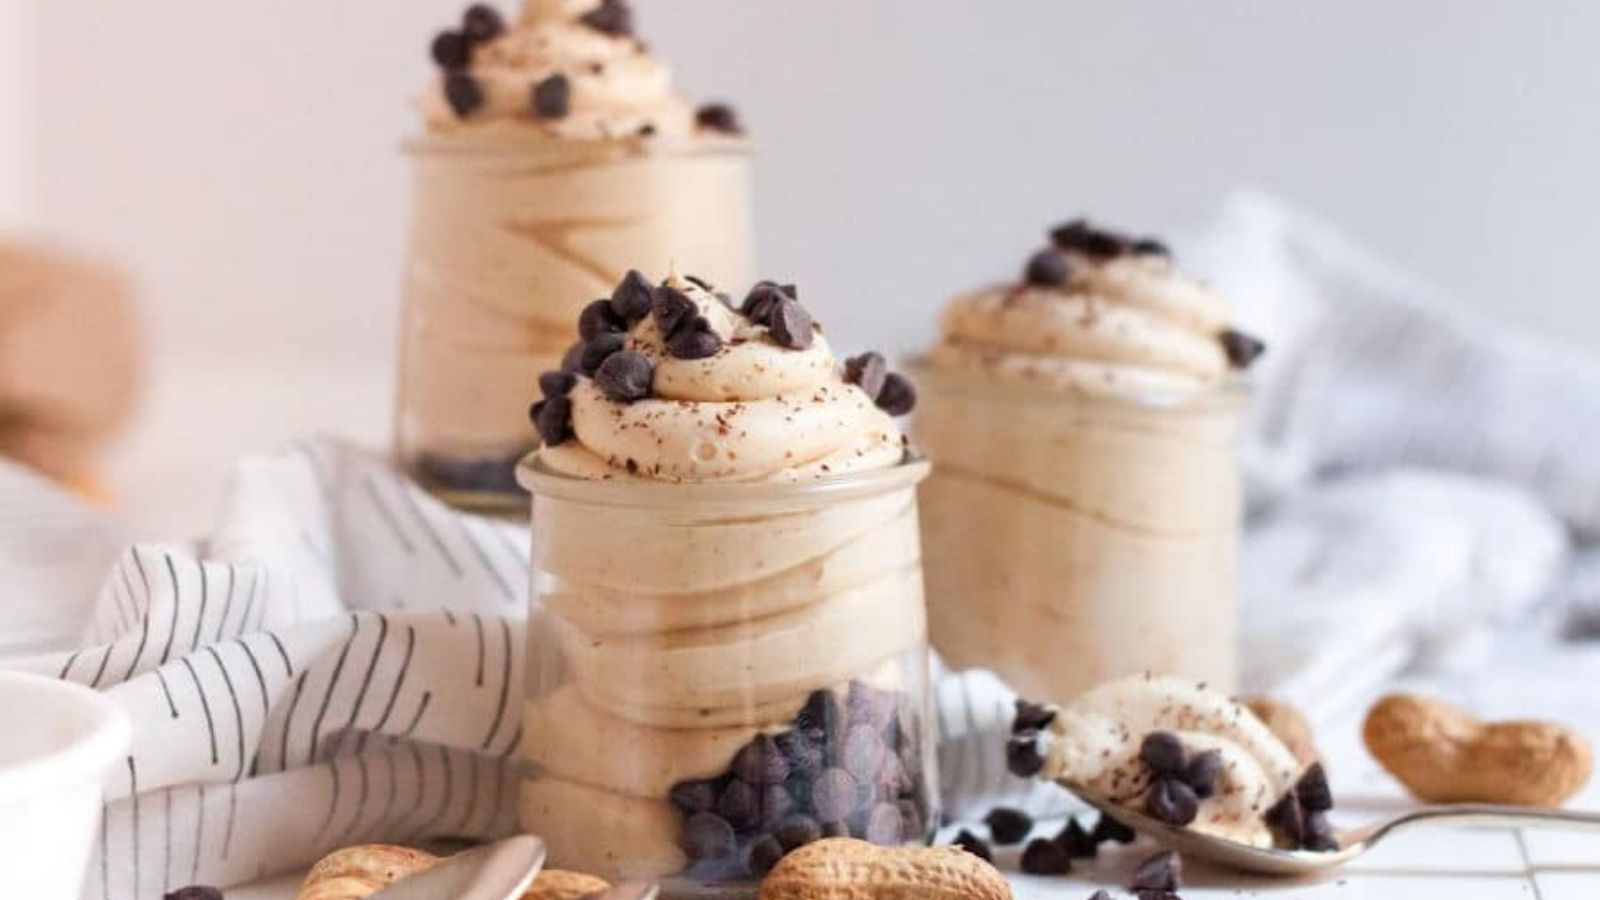 <p>This deliciously easy Keto Peanut Butter Mousse recipe will make you forget you are following a low carb diet. It’s one of my favorite keto desserts to make! It is the perfect light and fluffy alternative to those dense fat bombs! At just 2g net carbs per serving and 5 simple ingredients, it’s impossible to resist!</p><p><strong>Recipe:</strong> <a href="https://kaseytrenum.com/peanut-butter-fat-bomb/"><strong>peanut butter mousse</strong></a></p>